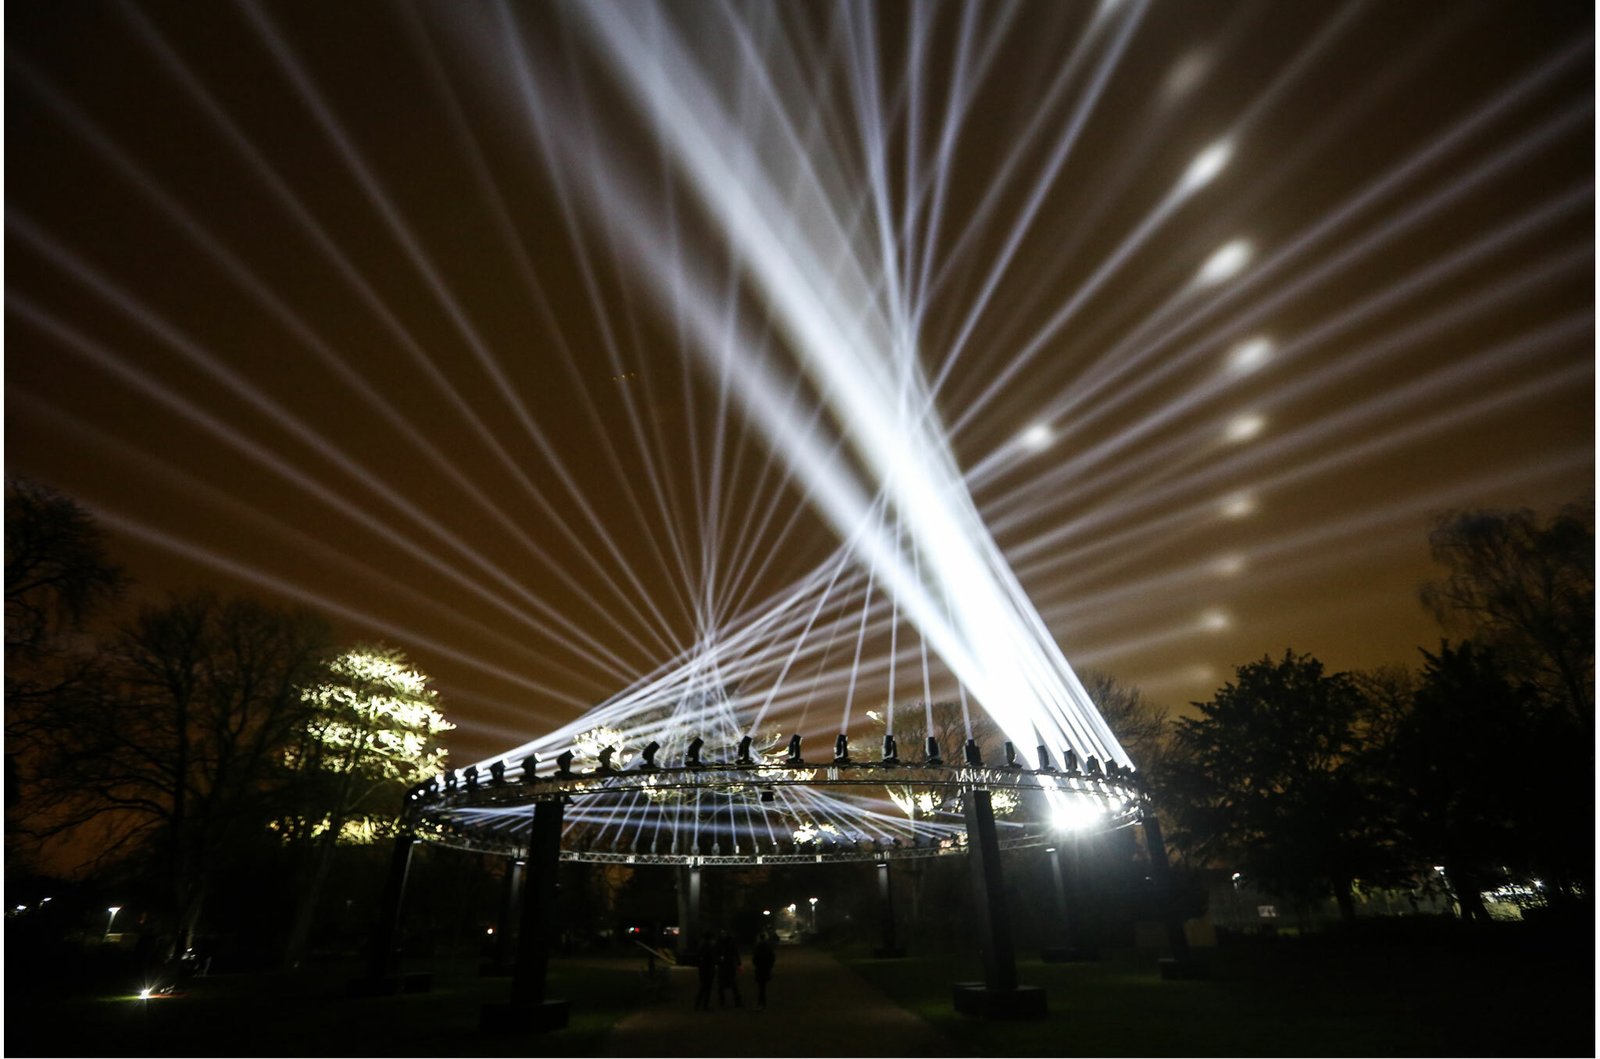 Waltham Forest is being bathed in light tonight and it looks incredible